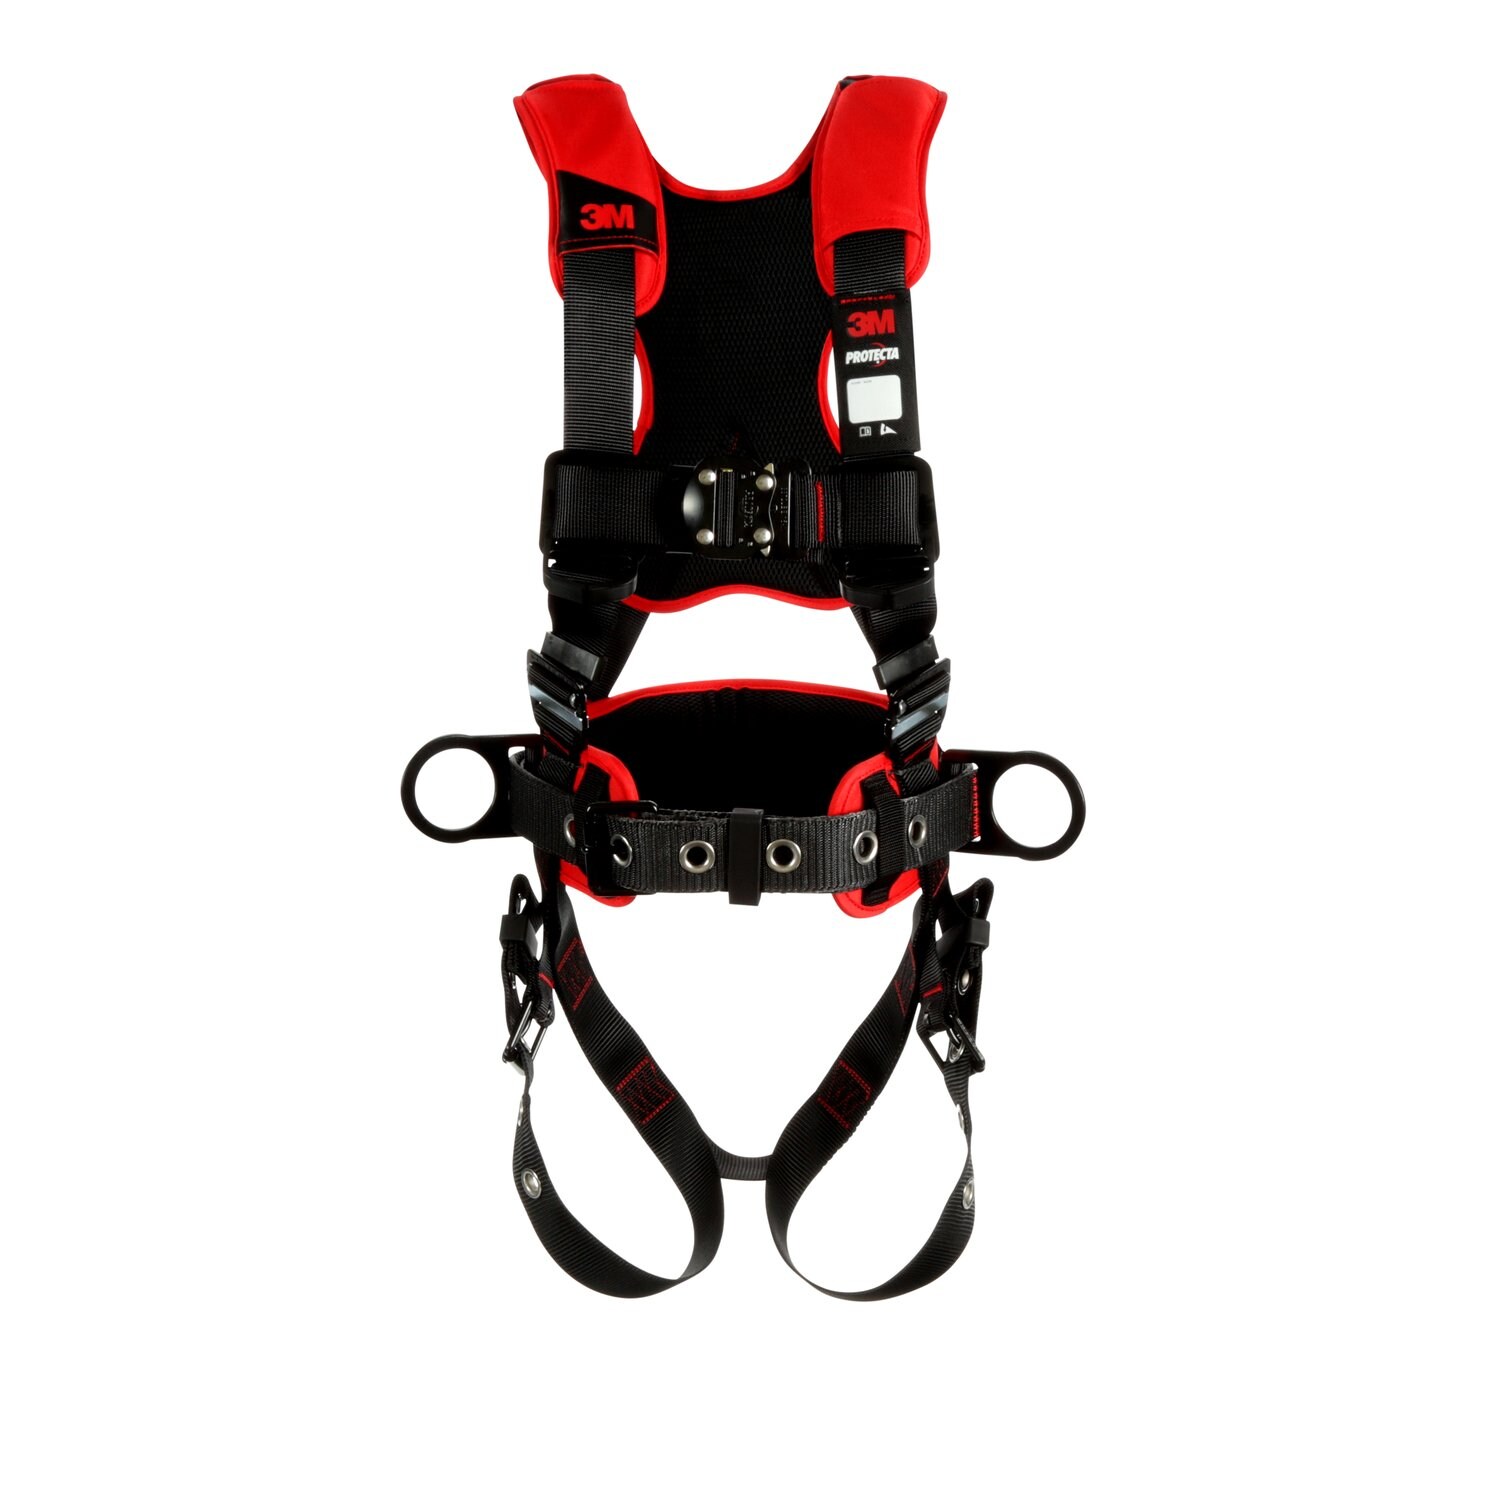 7012816618 - 3M Protecta P200 Comfort Construction Positioning Safety Harness 1161217, Medium/Large